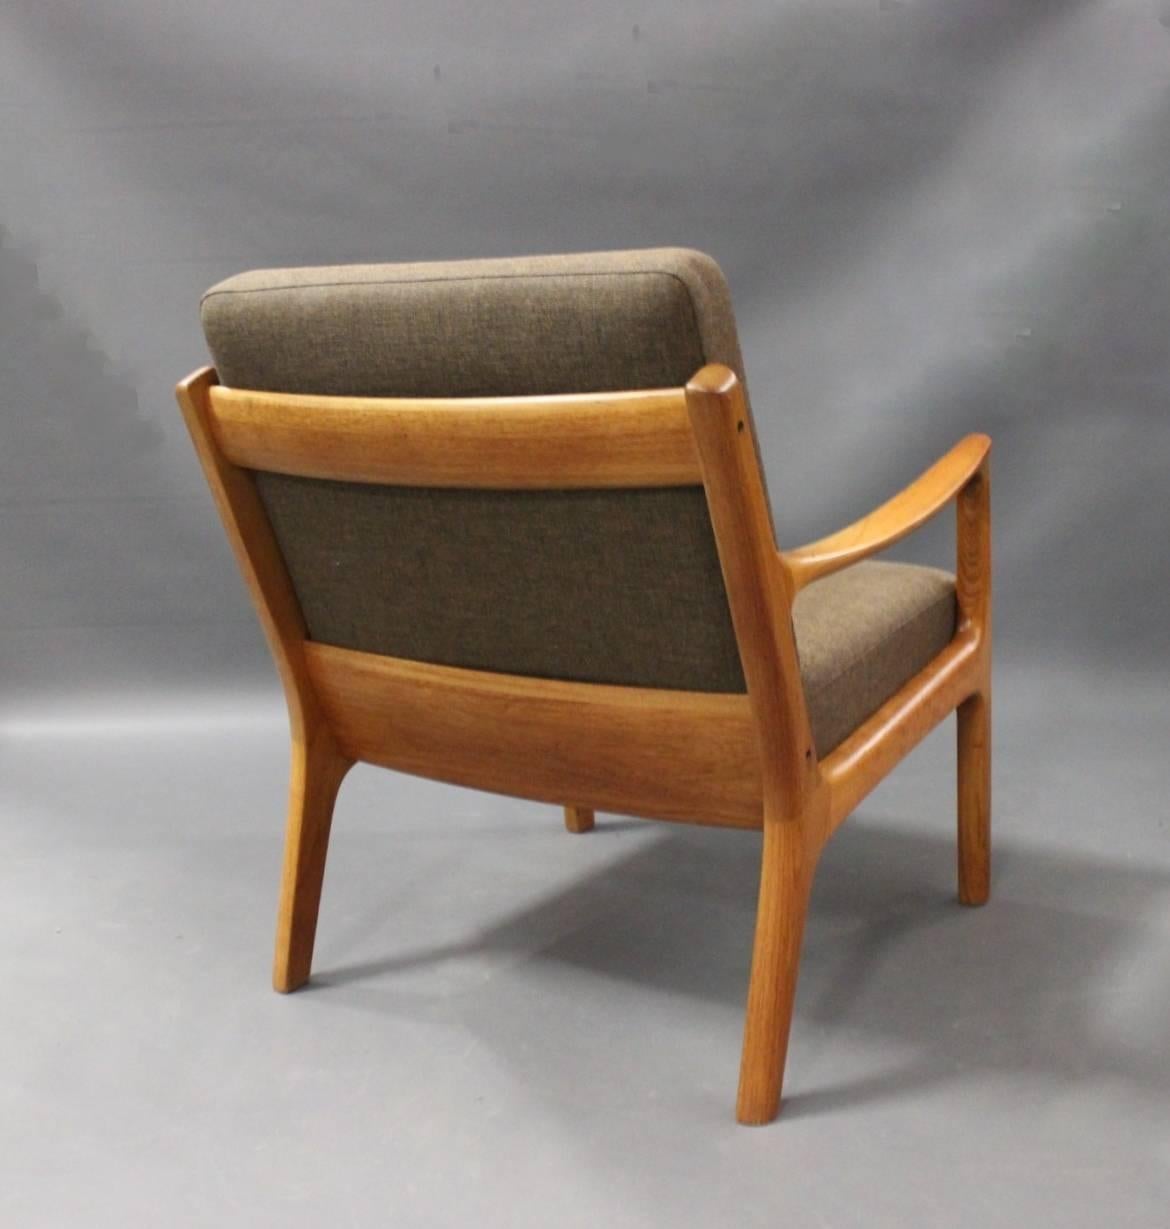 Lounge chair, model 166, designed by Ole Wanscher in the 1950s for France & Son. The chair is in teak and upholstered with dark wool.